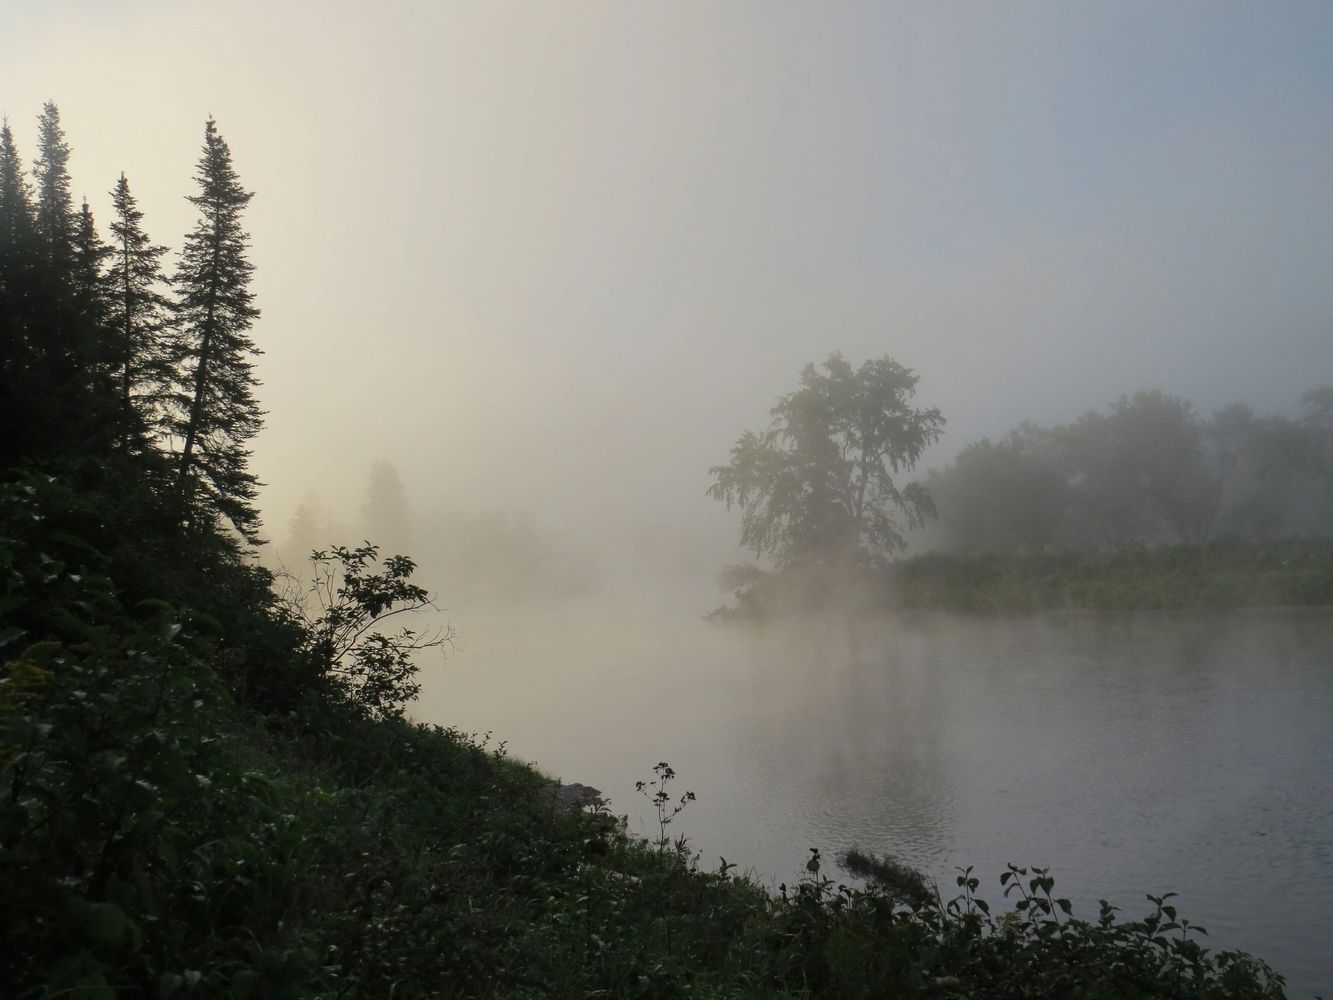 Misty morning on the Allagash River